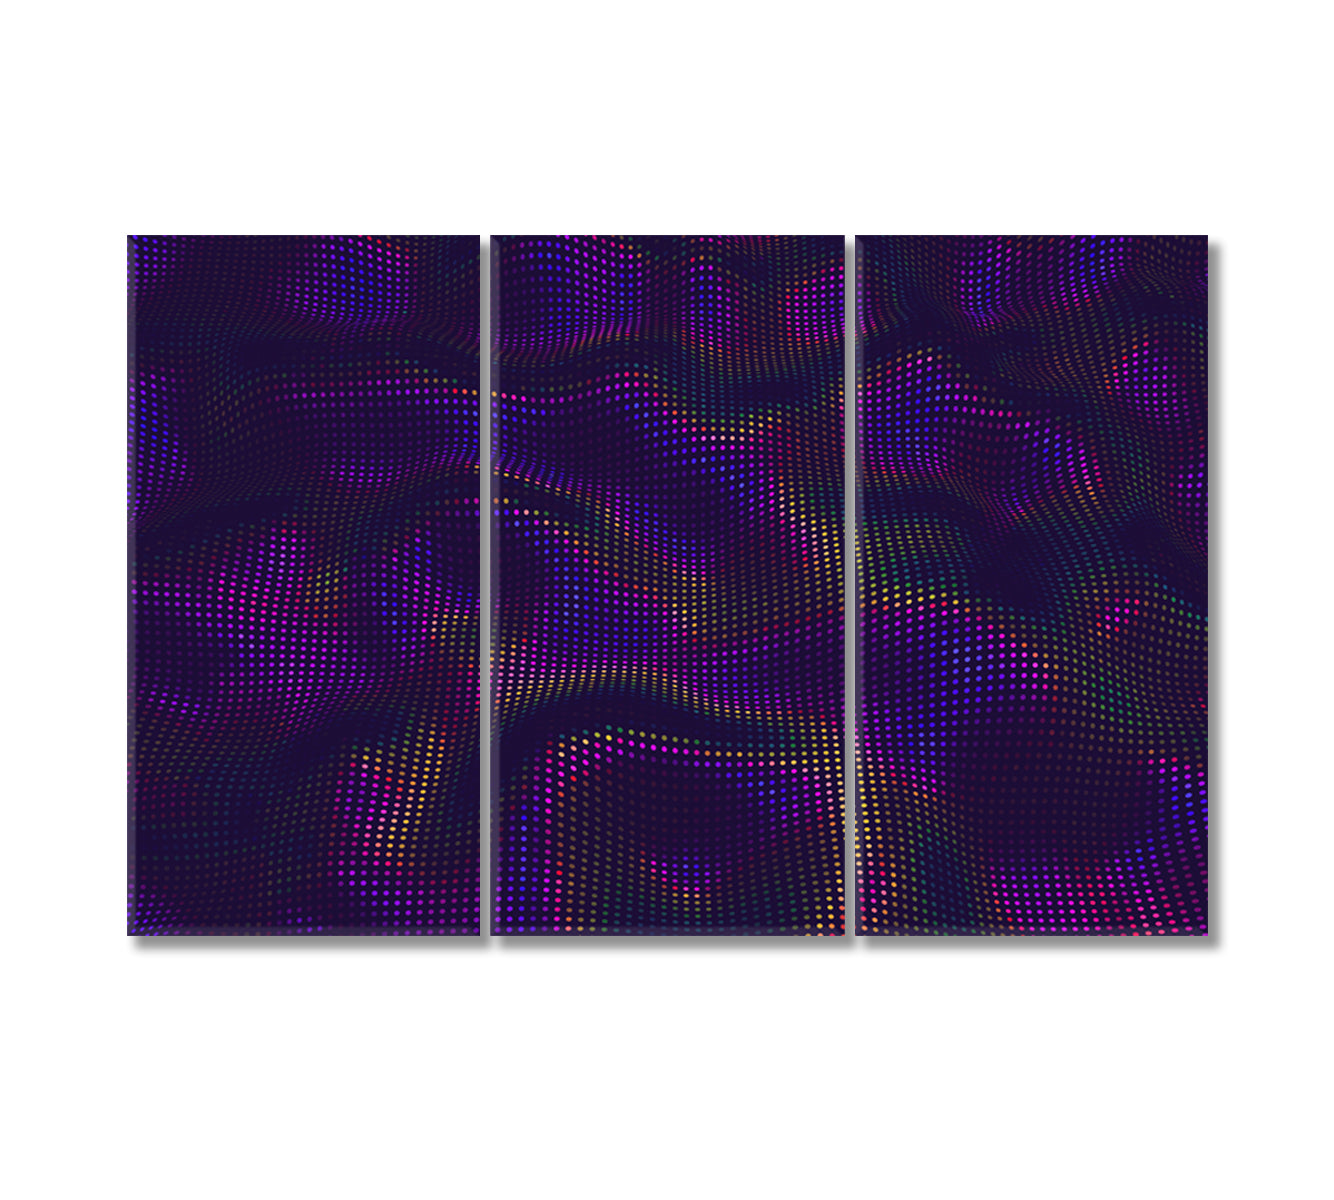 Holographic Iridescent Abstract Waves Canvas Print-Canvas Print-CetArt-3 Panels-36x24 inches-CetArt